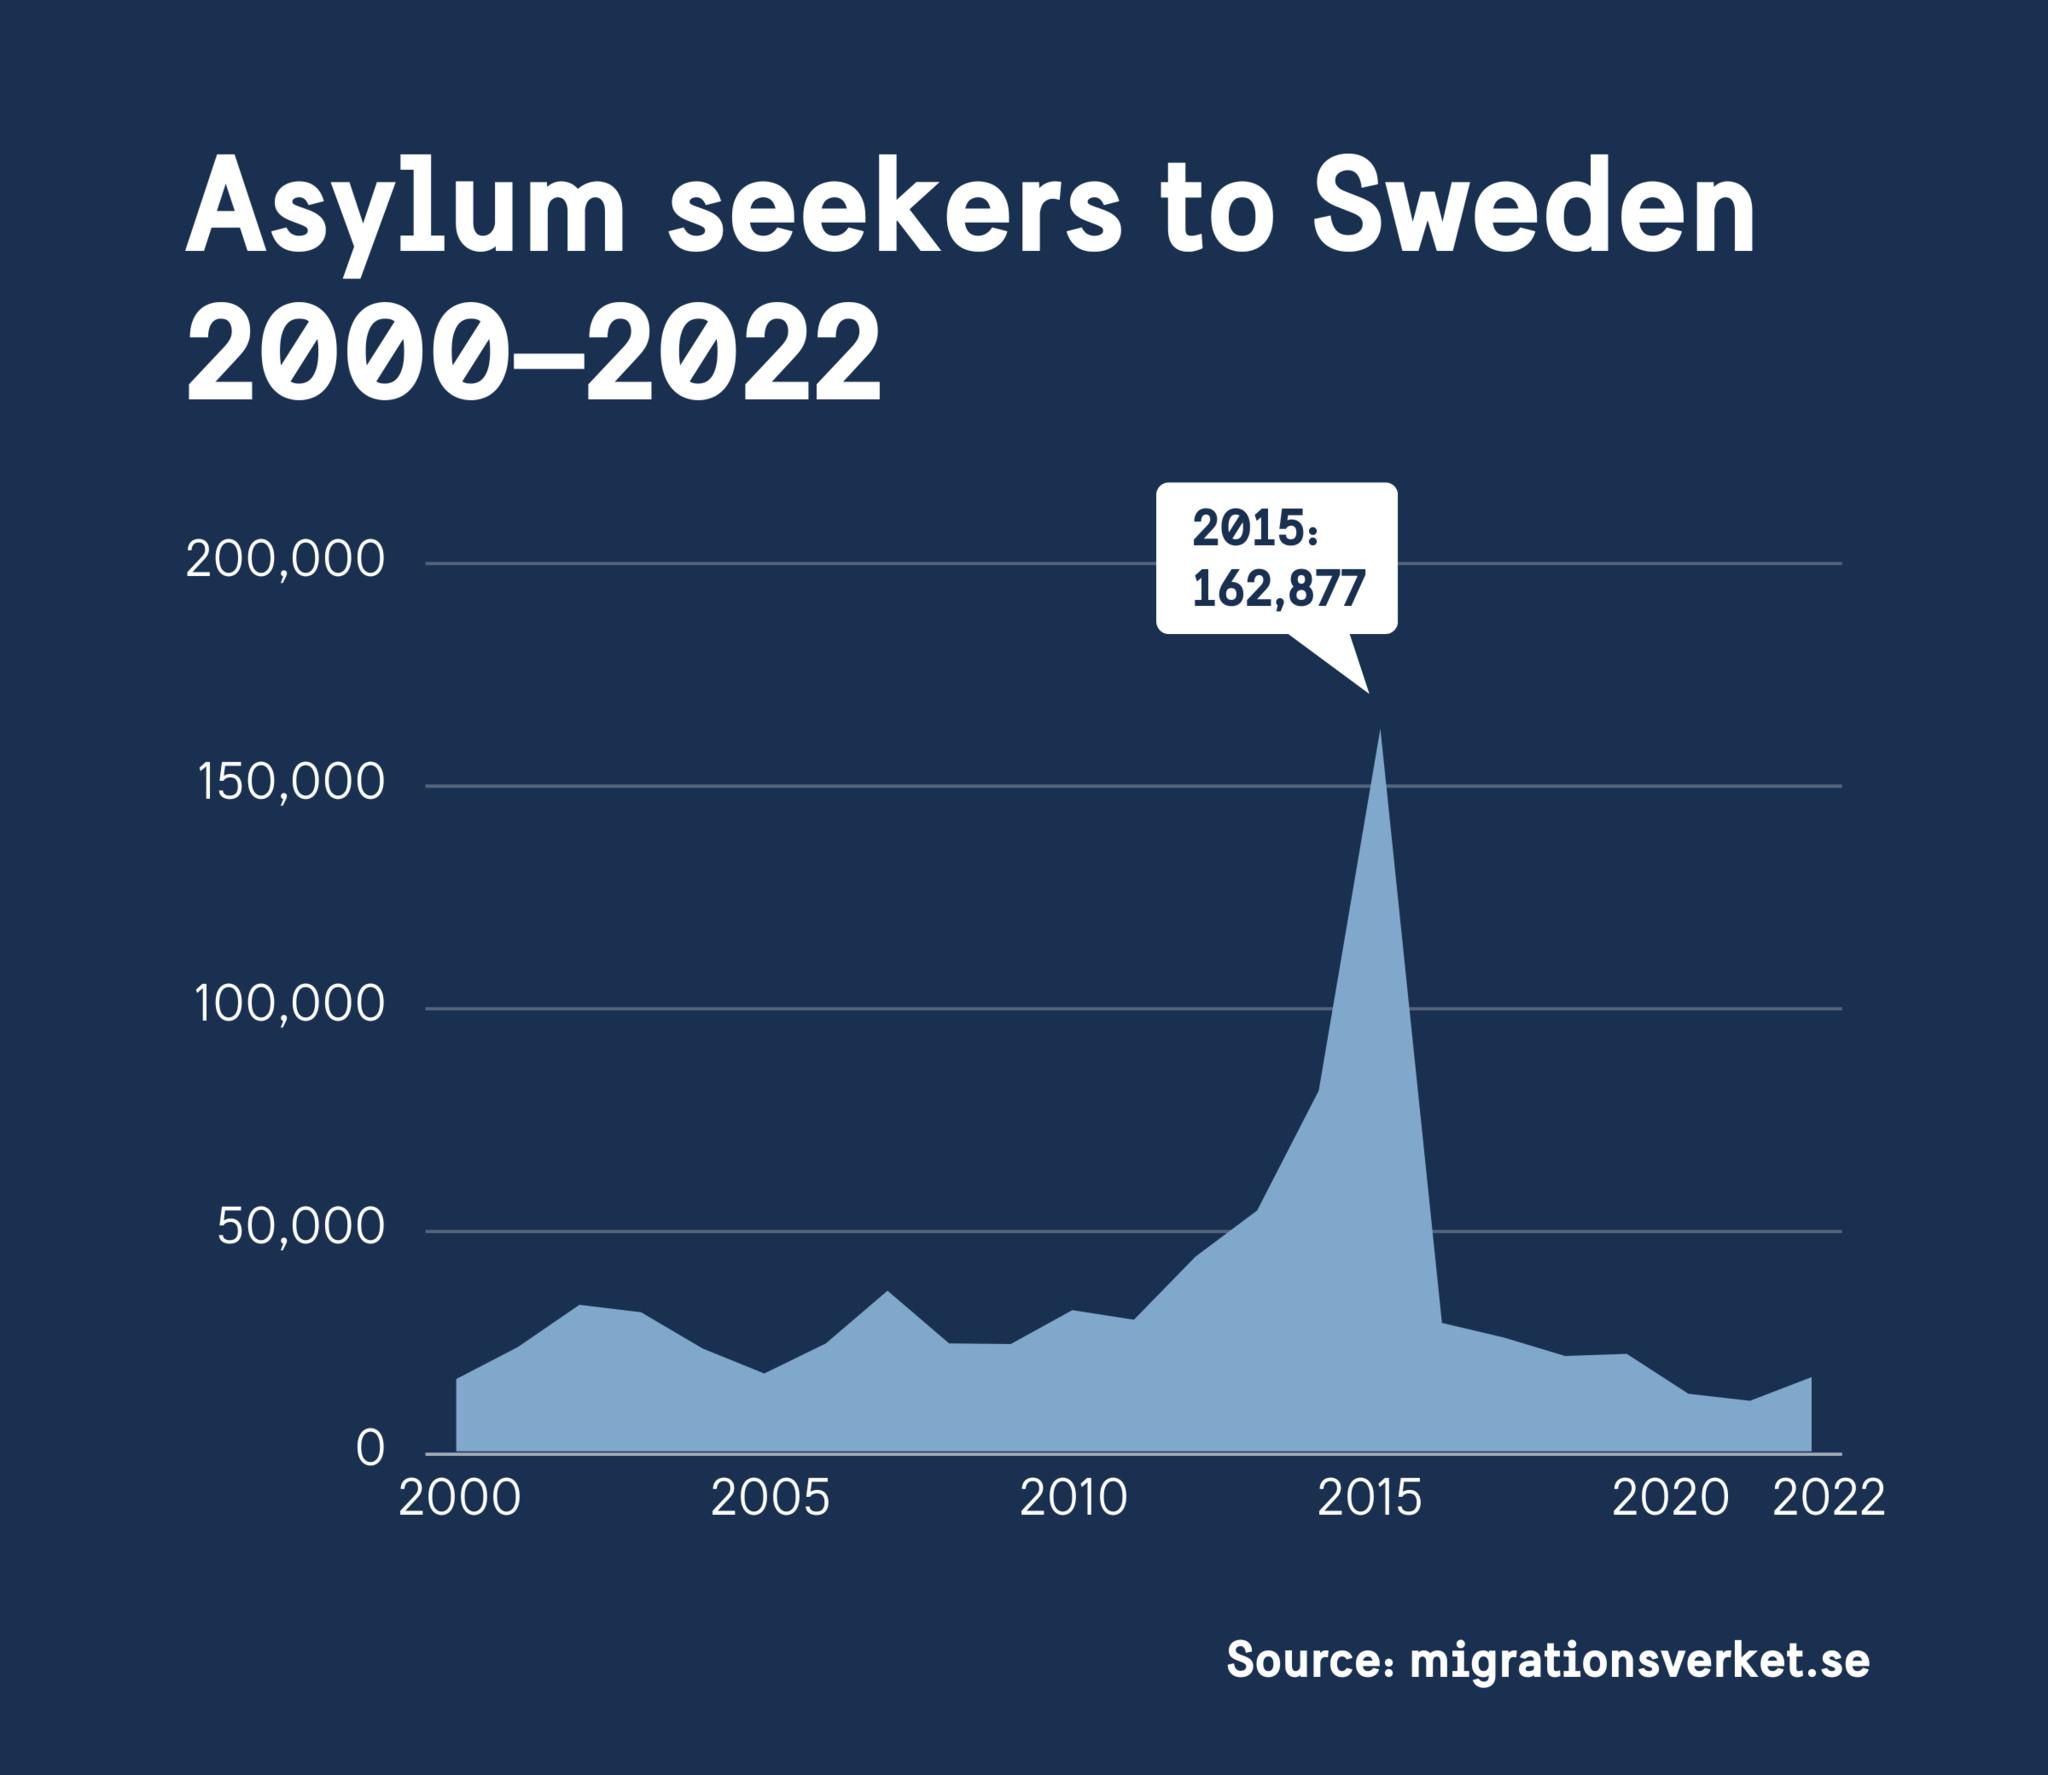 Chart showing the number of asylum seekers to Sweden between 2000 and 2022.